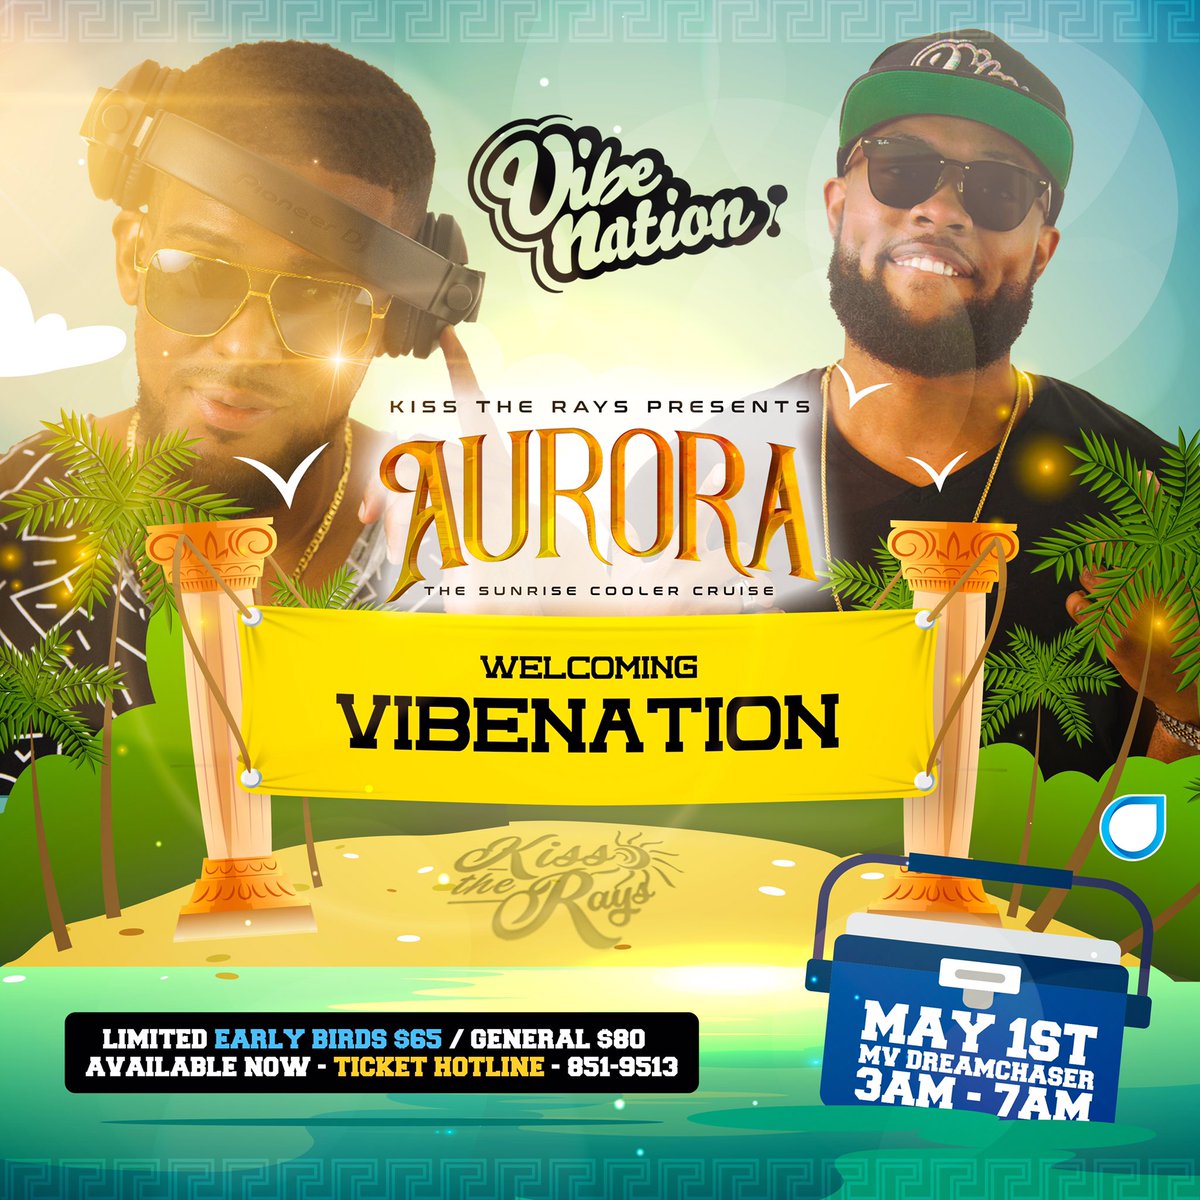 “It’s ah vibe every time they touch down Kiss The Rays the cruise
 Present AURORA 
 We welcome Vibenation as we
  Embrace The Sunrise 
DATE: Wednesday May 1st 2019
#fingerlickingood
#kisstheraysthecruise 
#makemaydaygreatagain
#kisstheraysaurora
#embracethesunrise #barbados